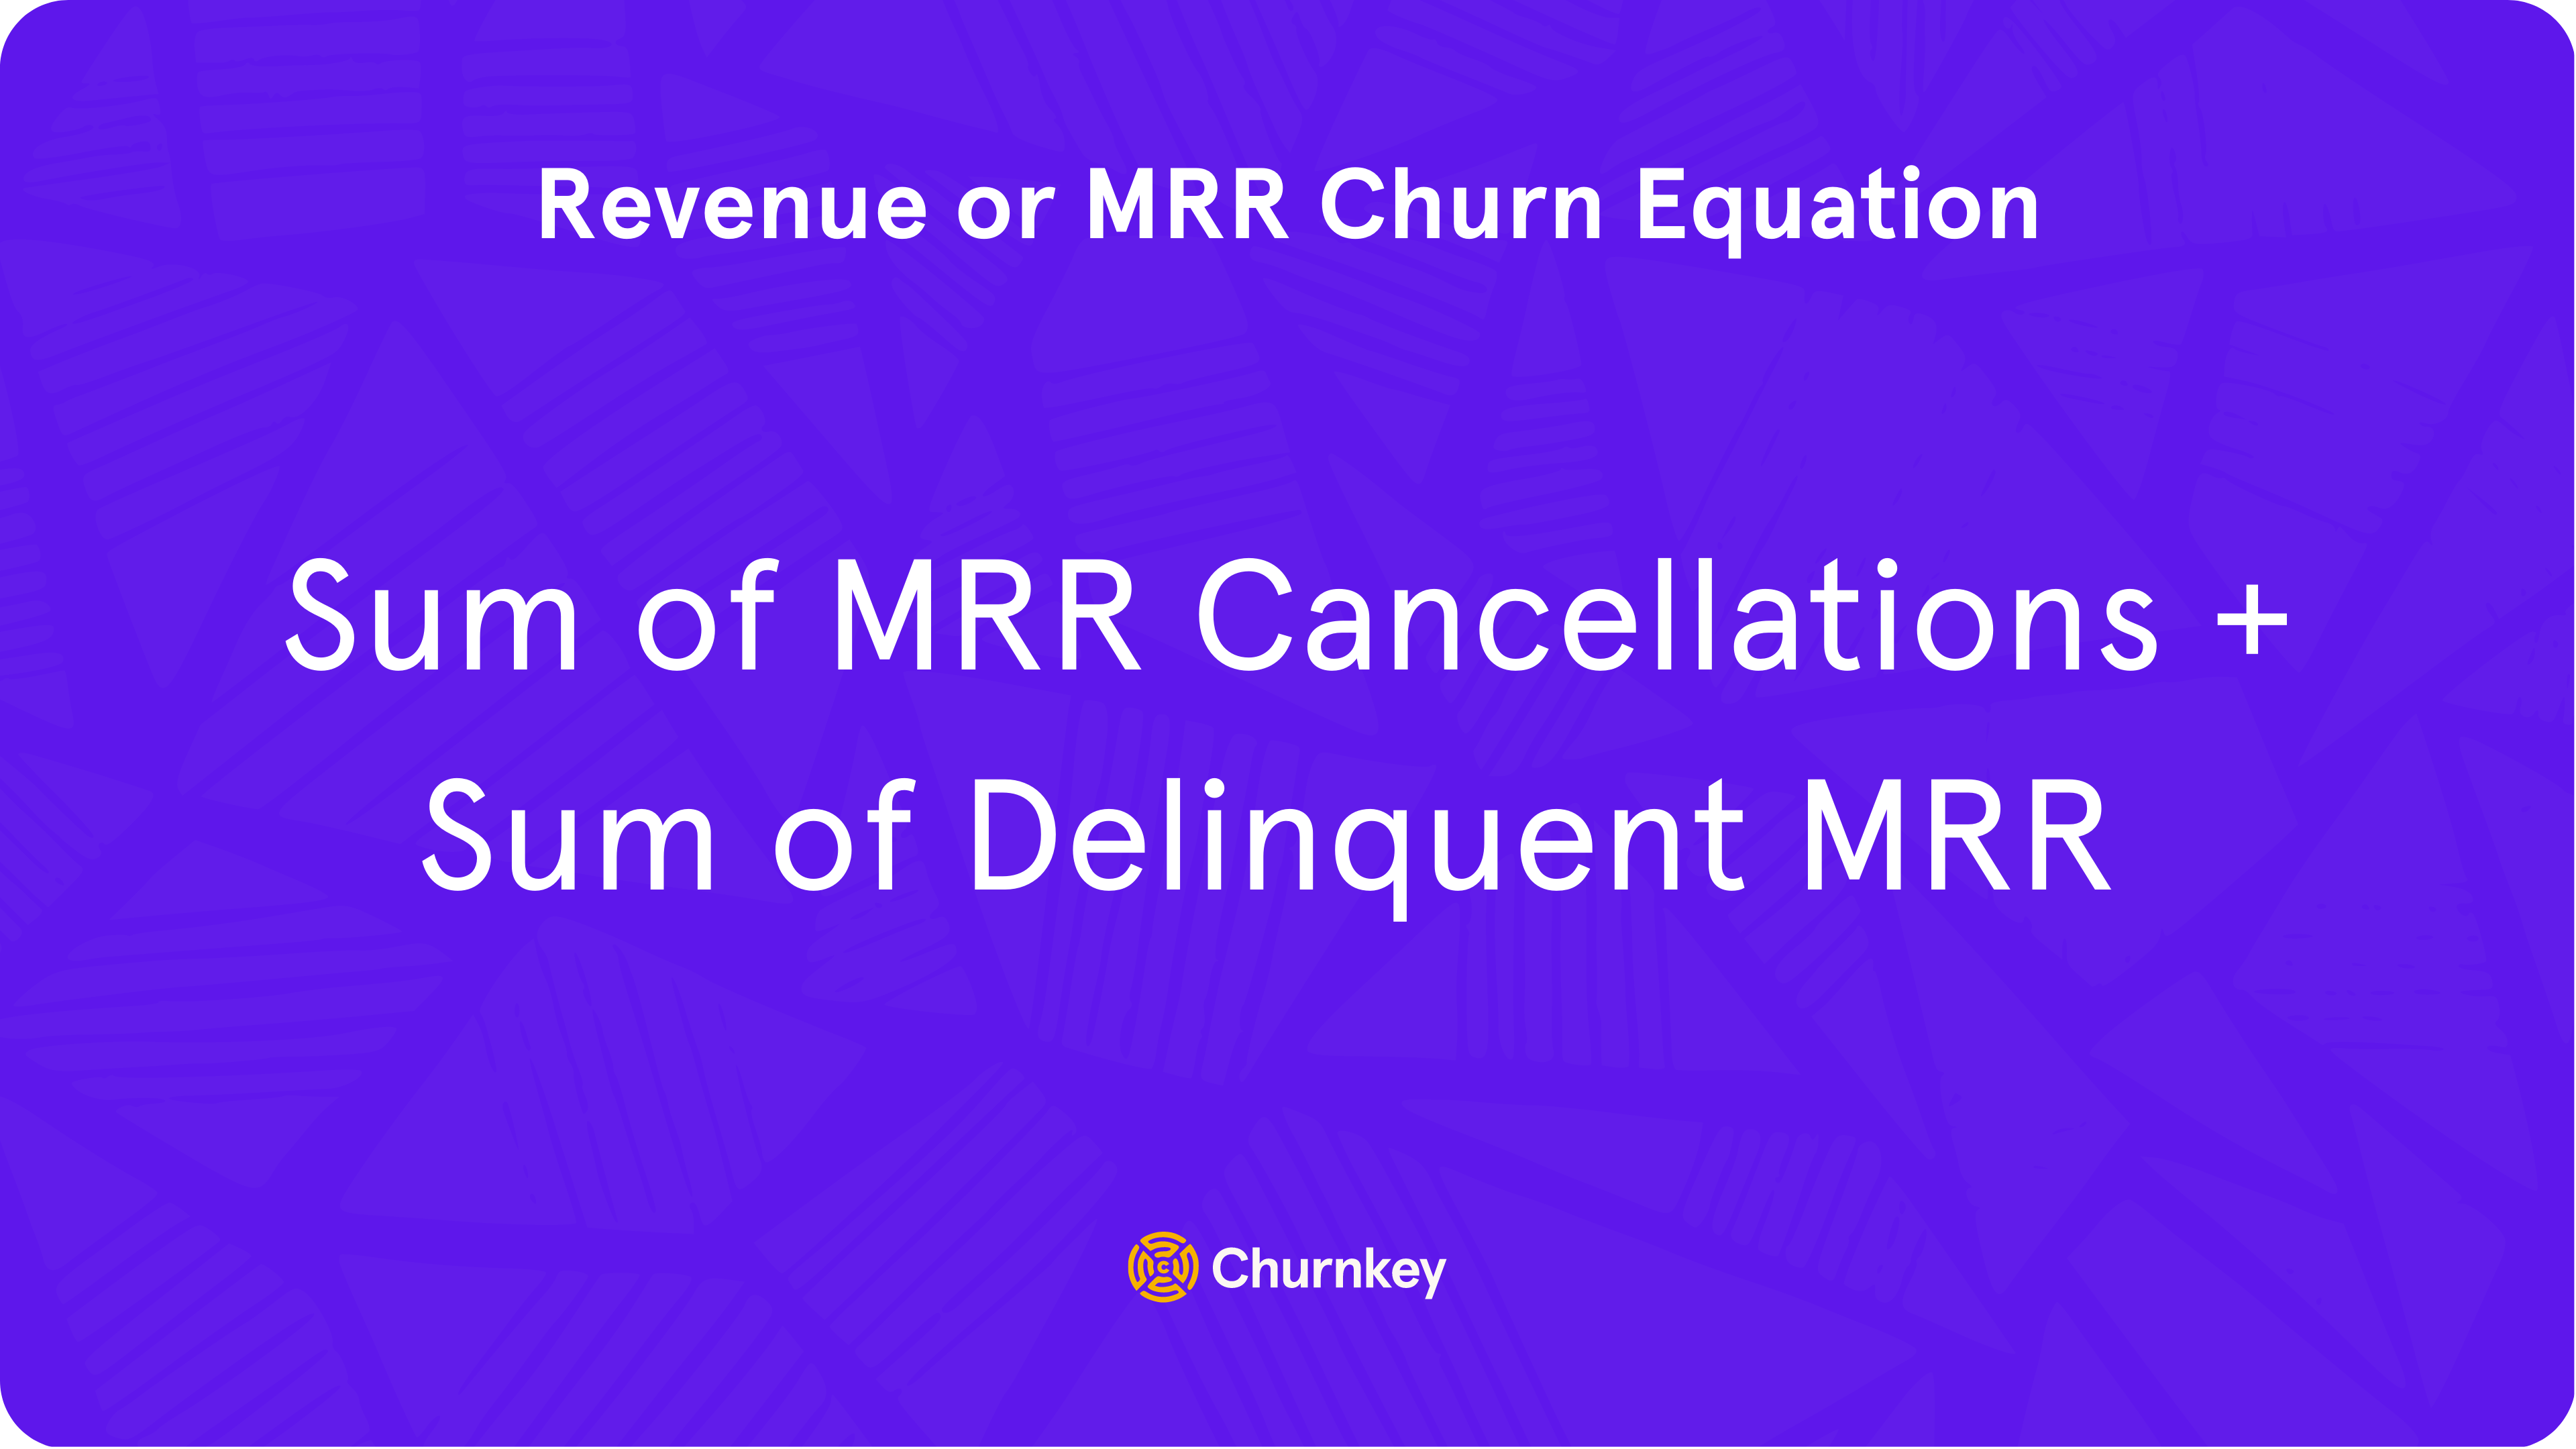 MRR Churn Equation: ​​MRR churn = Sum of MRR Cancellations + Sum of Delinquent MRR